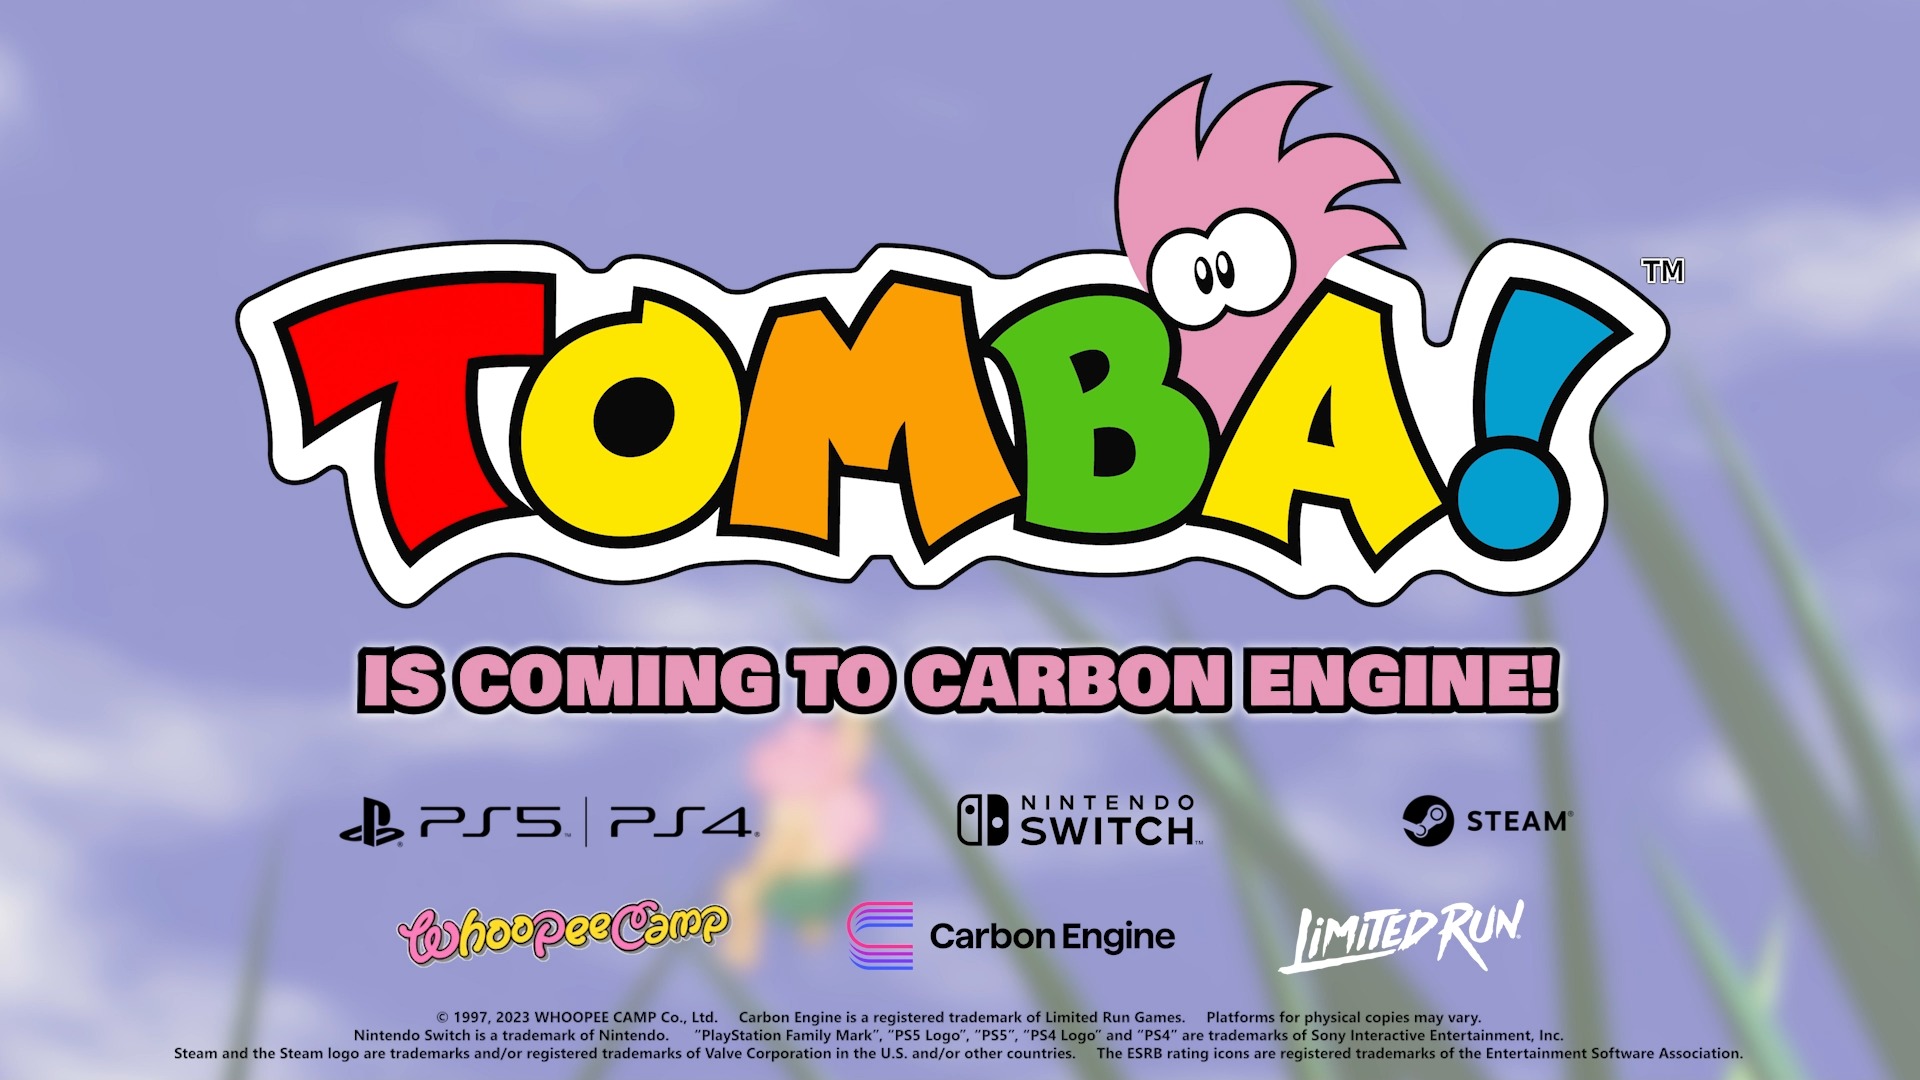 Limited Run Games on X: Our favorite pink-haired, high-jumping jungle boy  returns! Alongside creator Tokuro Fujiwara to bring the beloved platformer  Tomba to modern consoles via the Carbon Engine, with a new